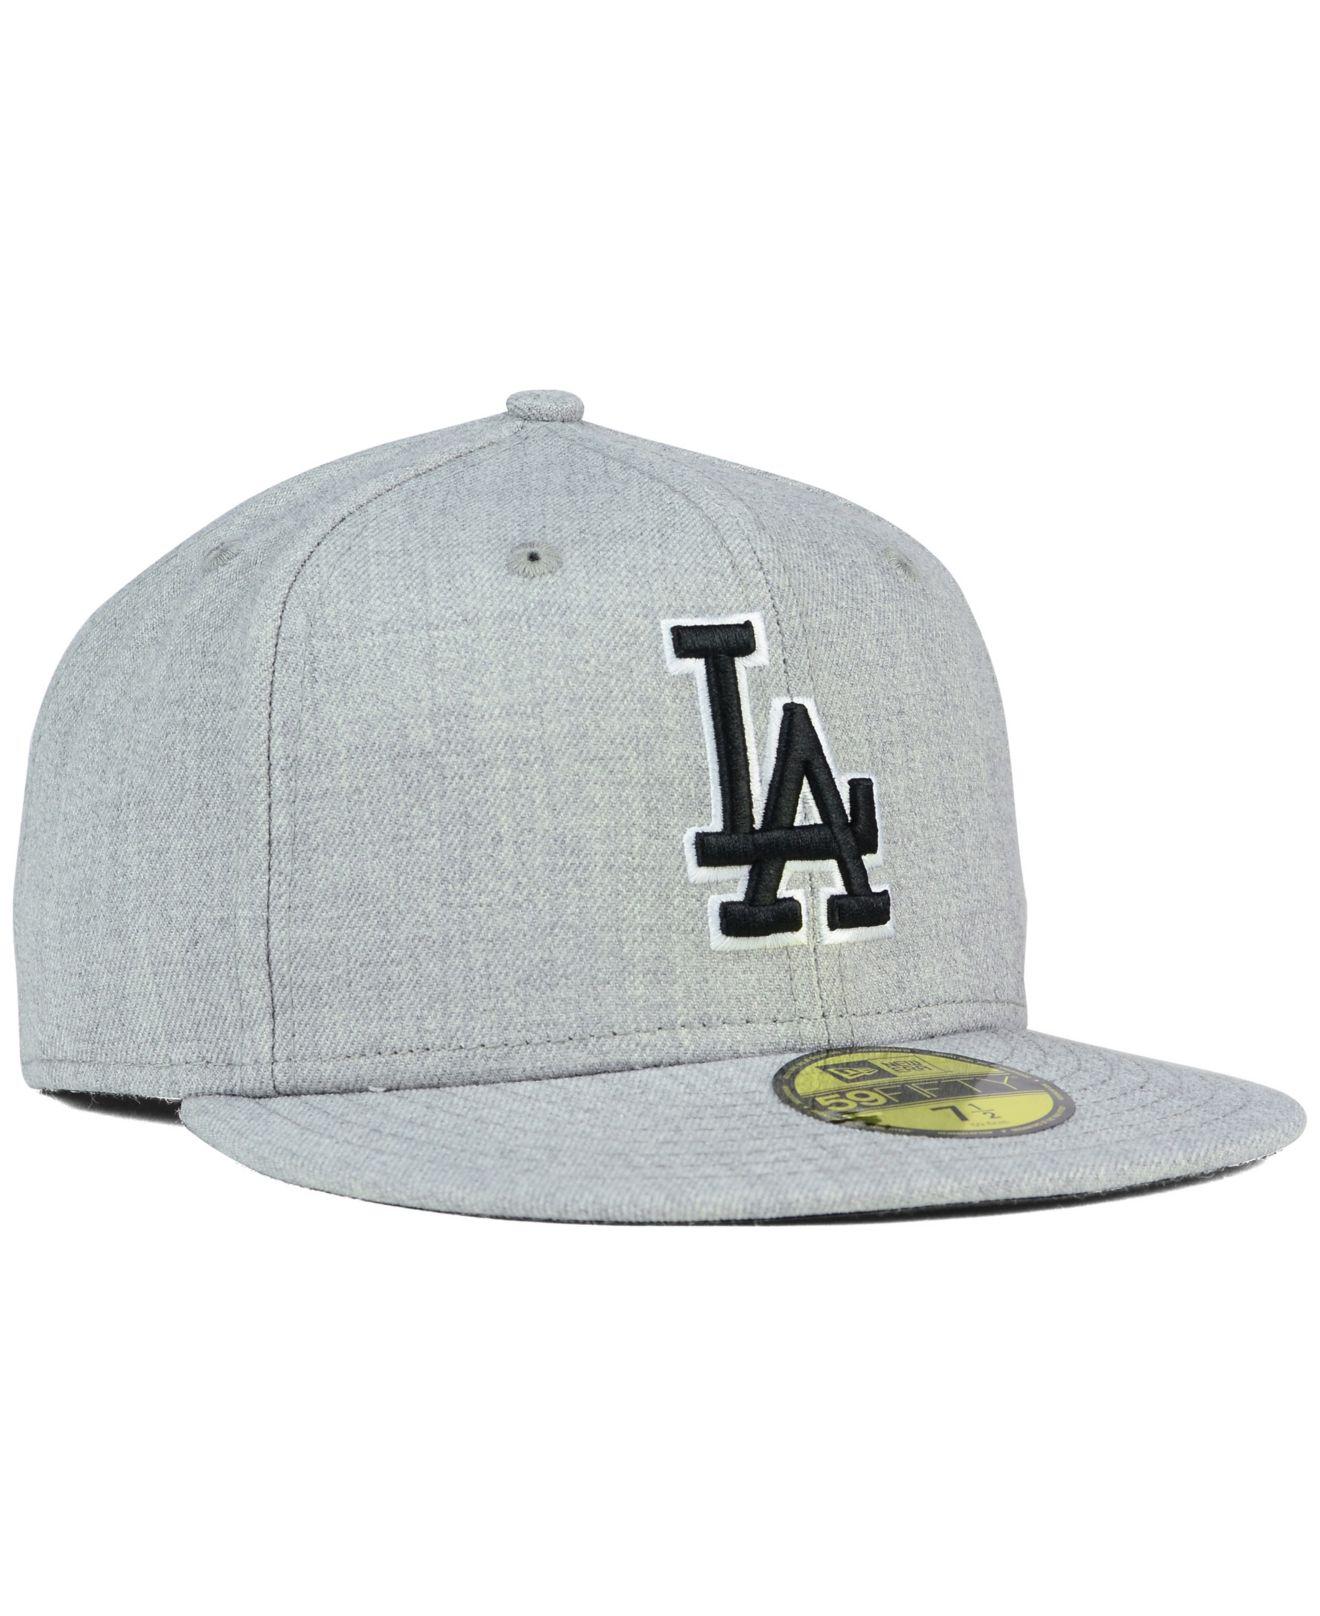 KTZ Los Angeles Dodgers Heather Black White 59fifty Cap in Gray